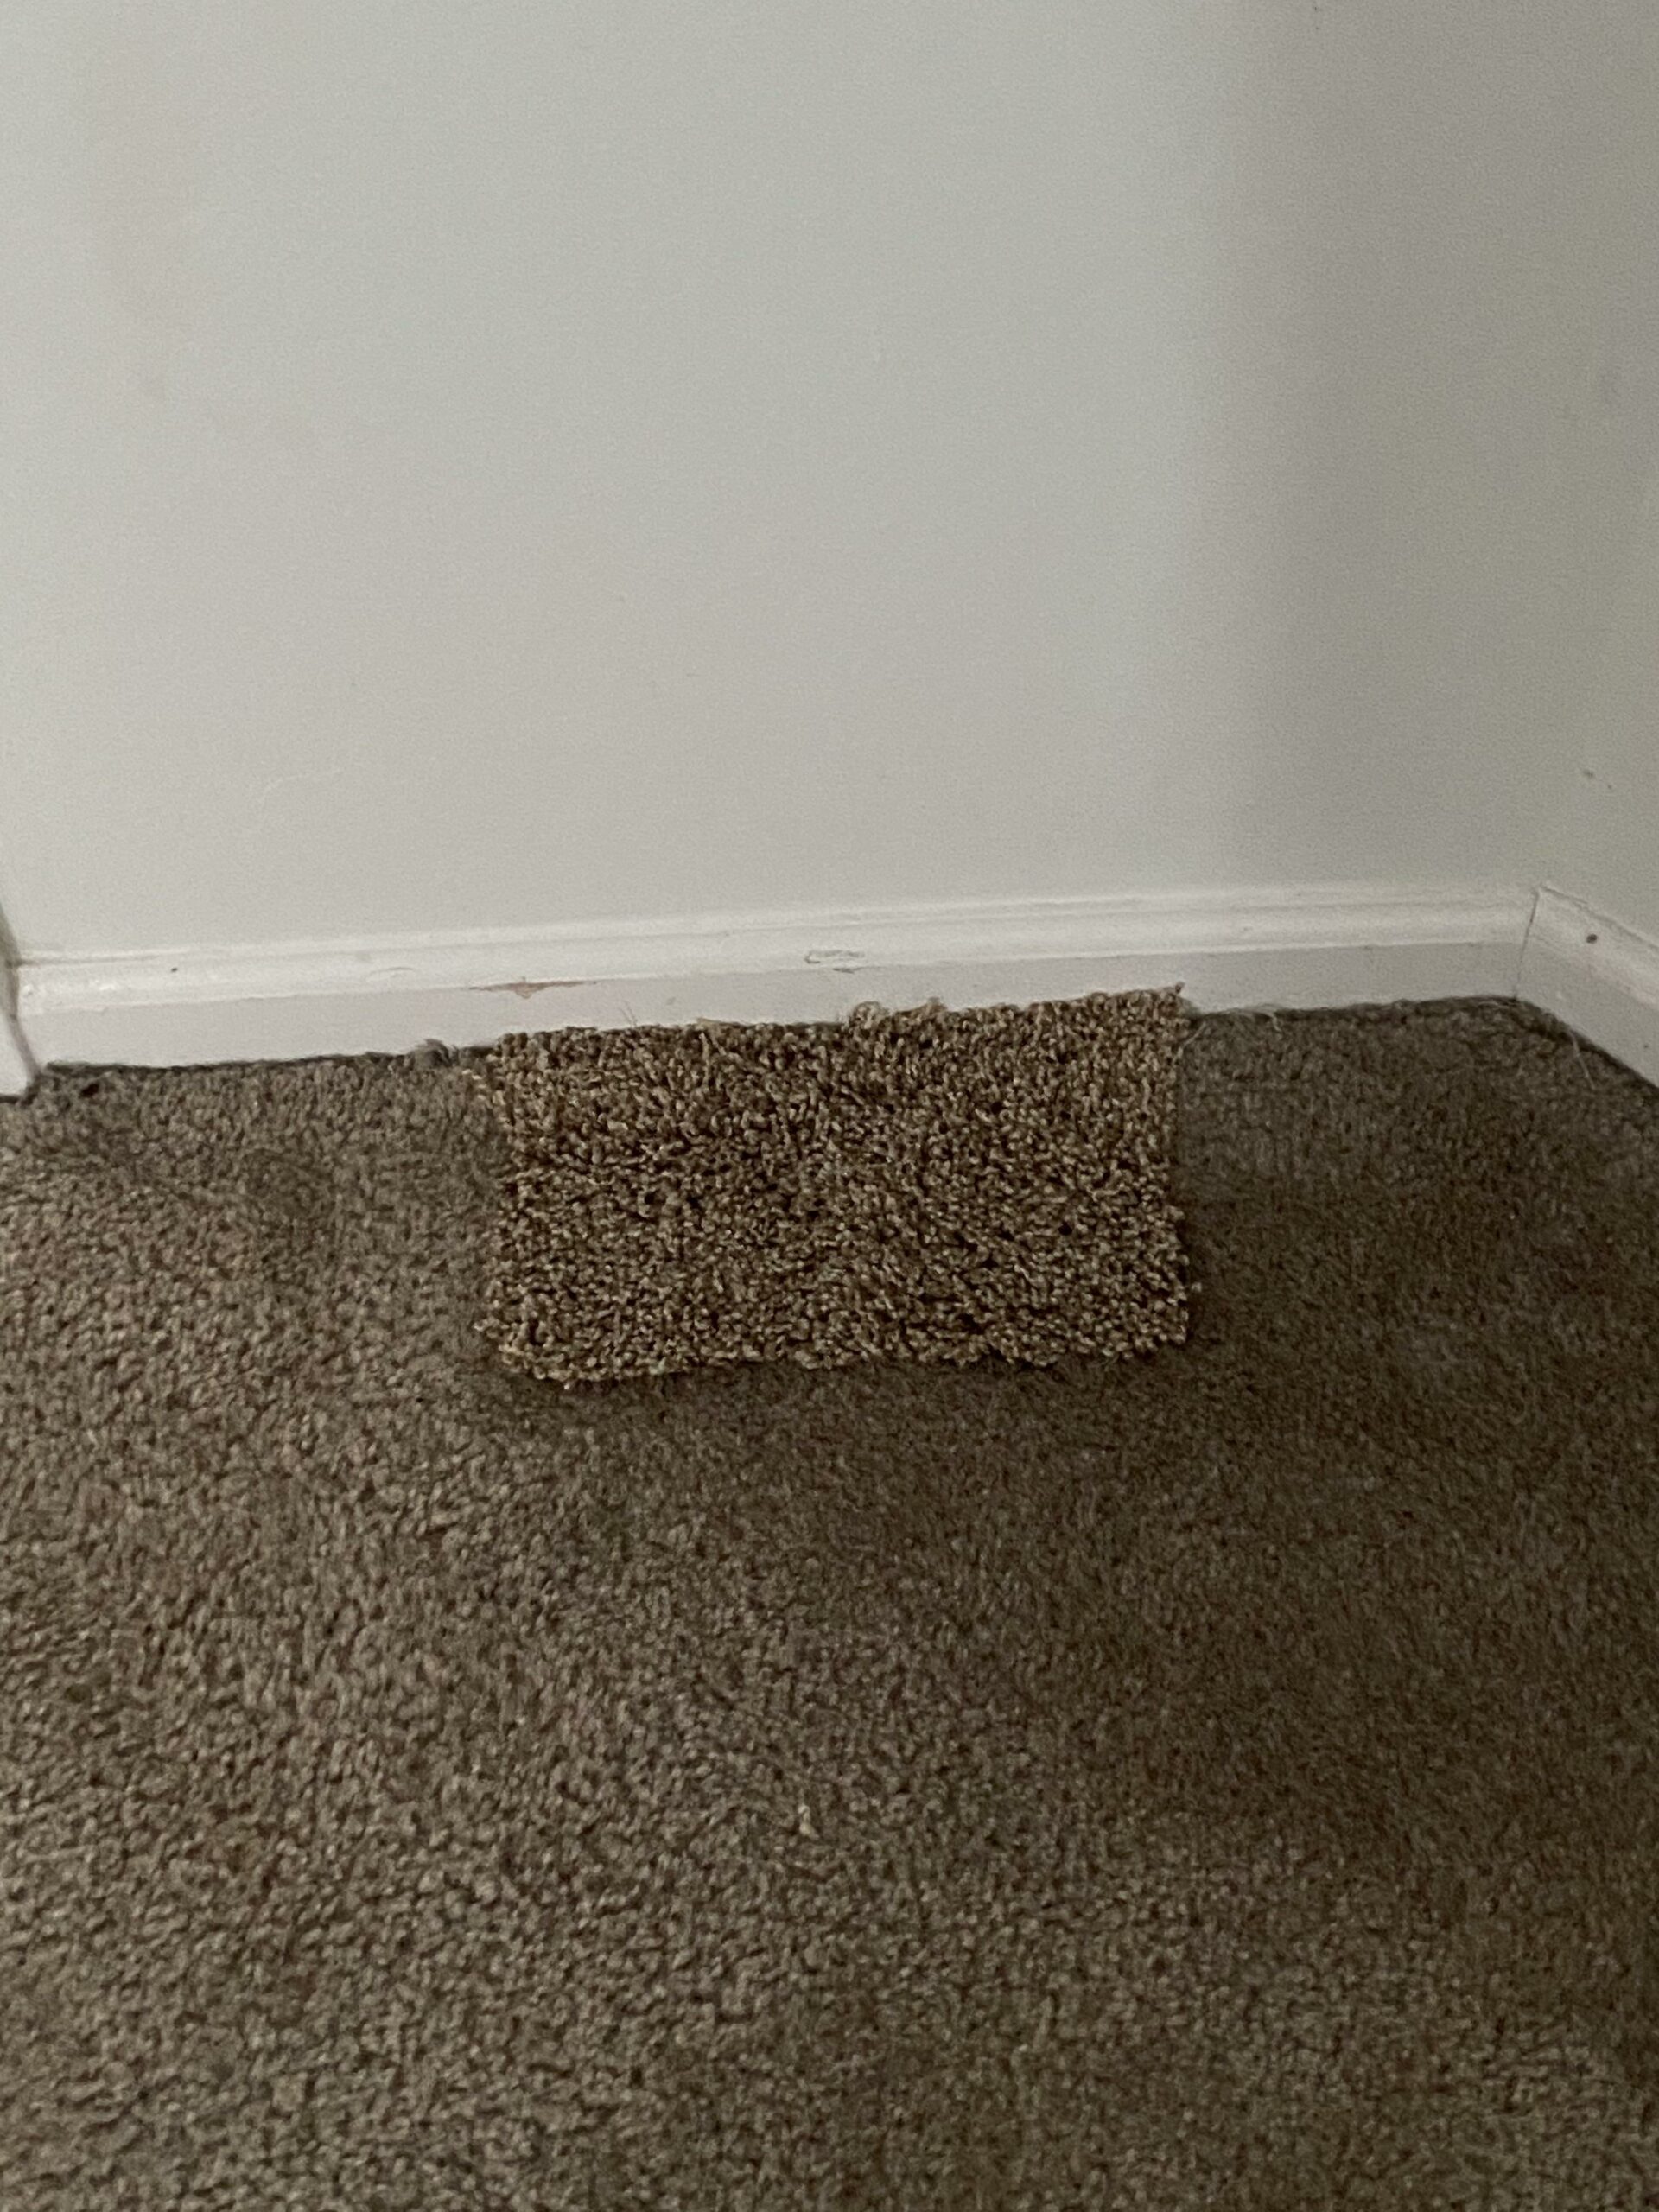 “Just moved into a new home and found where the landlord patched the carpet.”